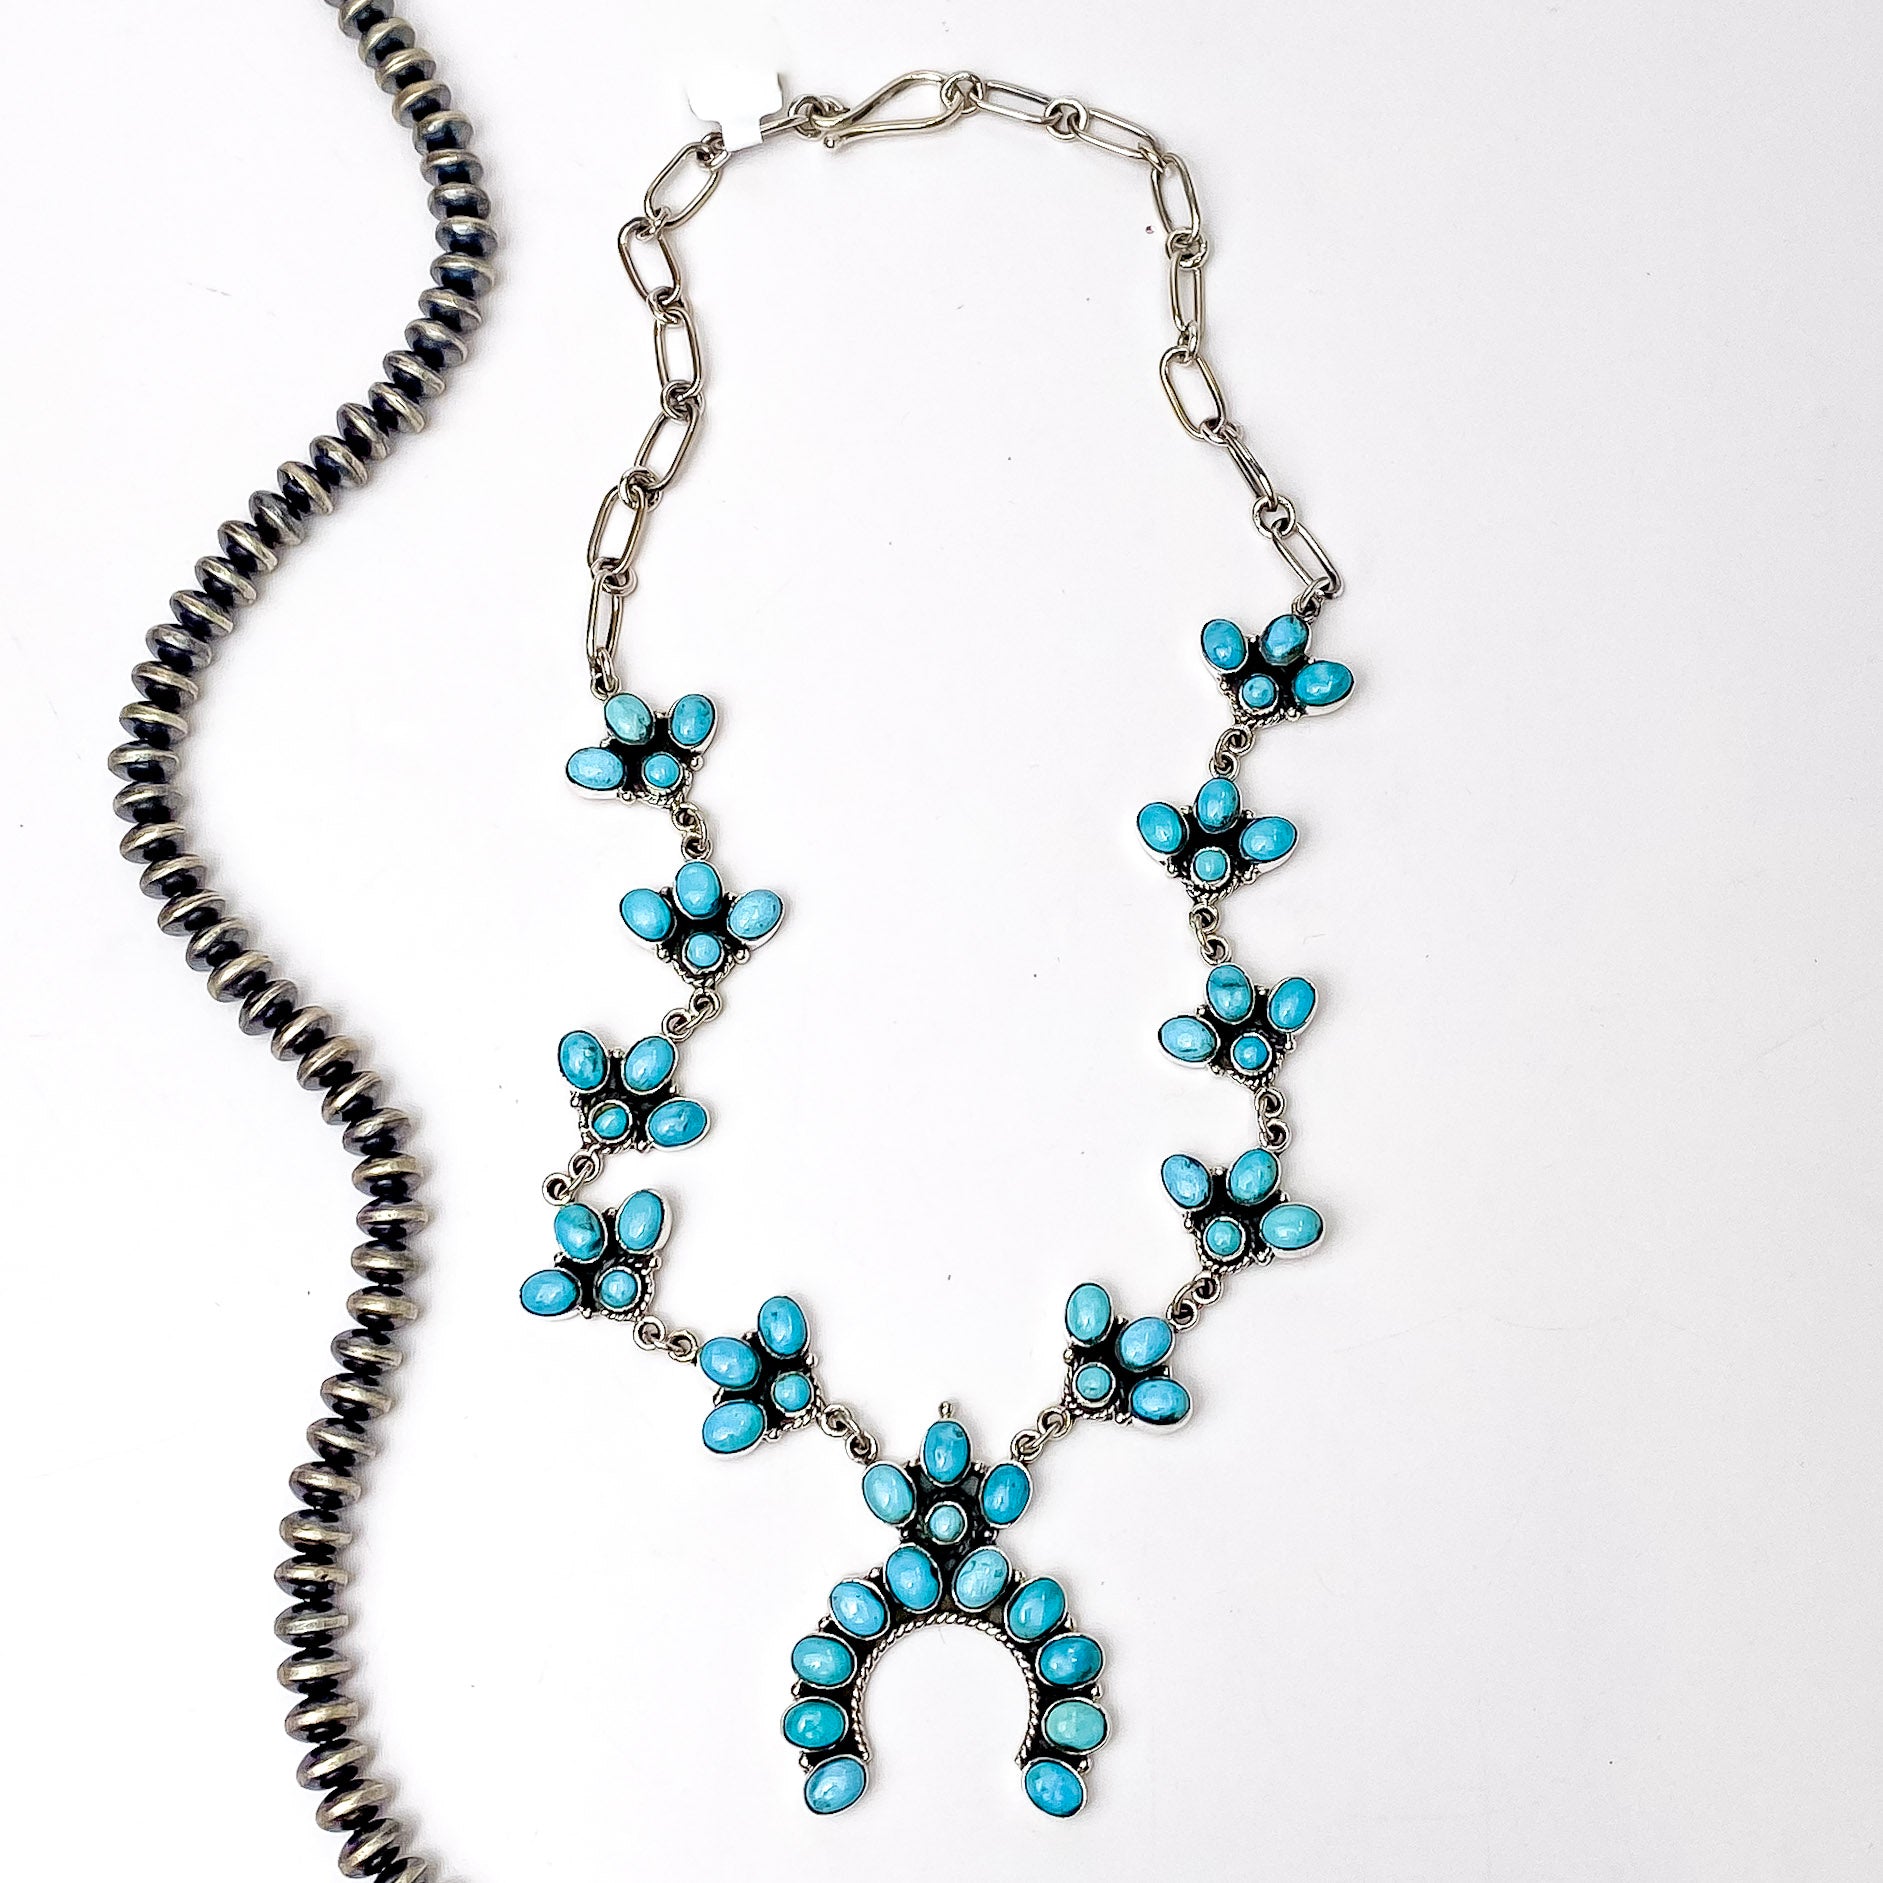 Hada Collection | Handmade Sterling Silver and Kingman Turquoise Naja Pendant Necklace - Giddy Up Glamour Boutique